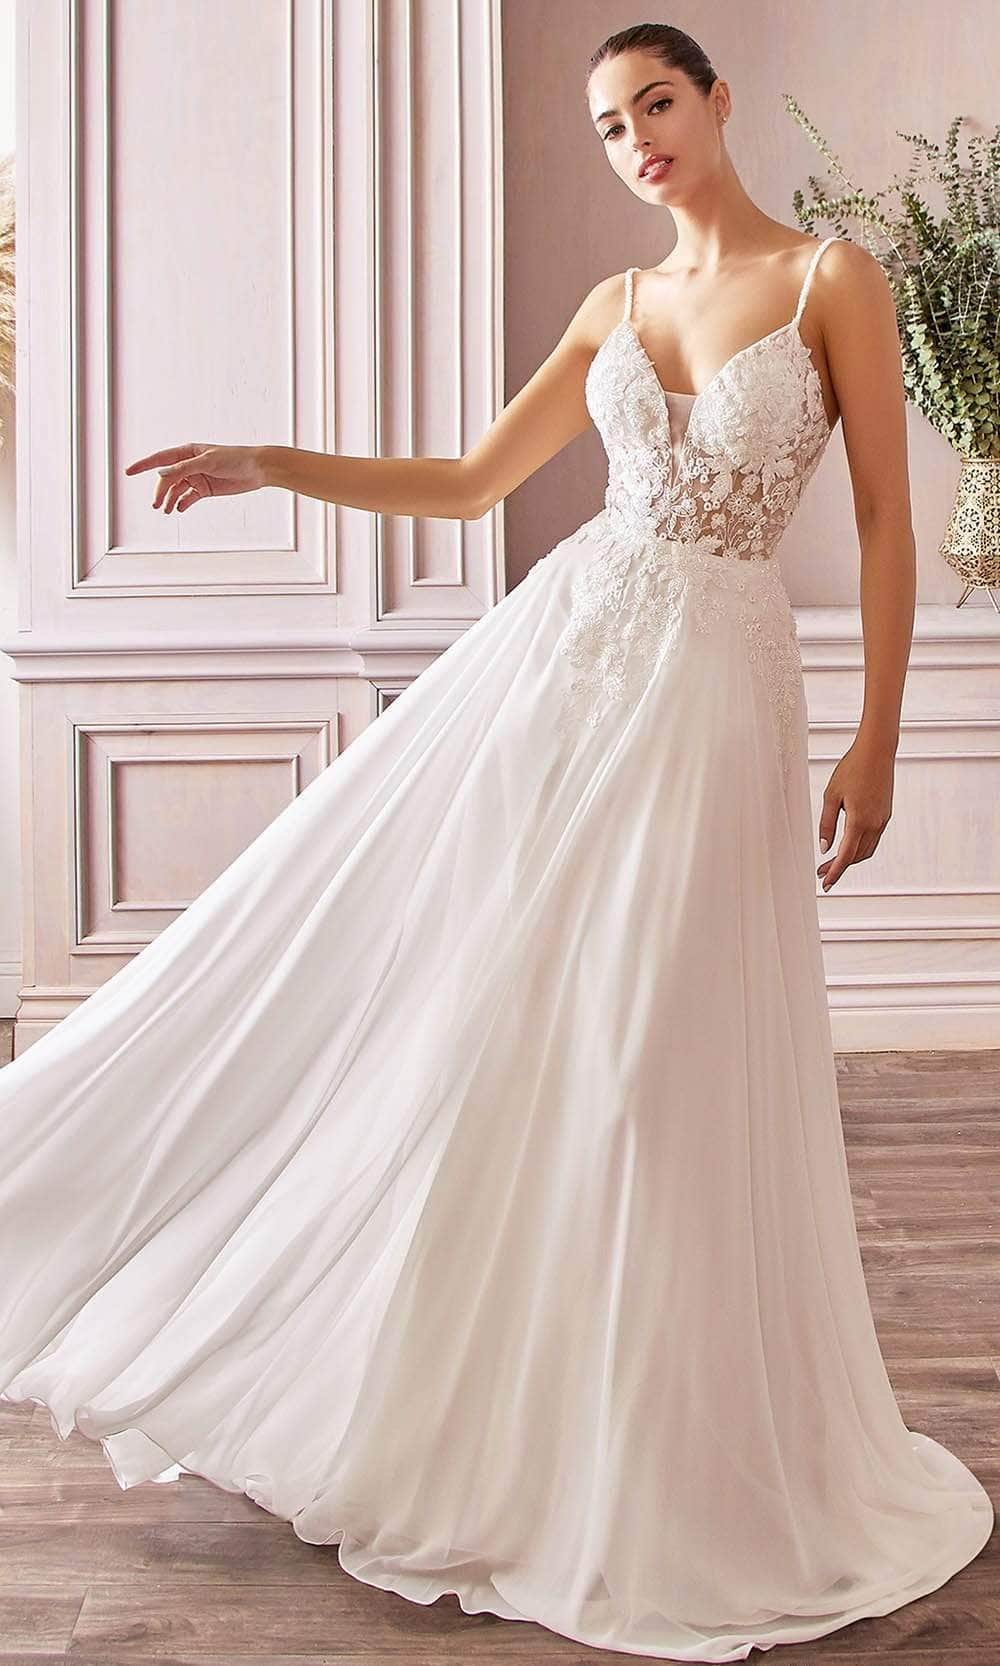 Ladivine Bridals - TY11 Sheer Floral Chiffon Bridal Gown
